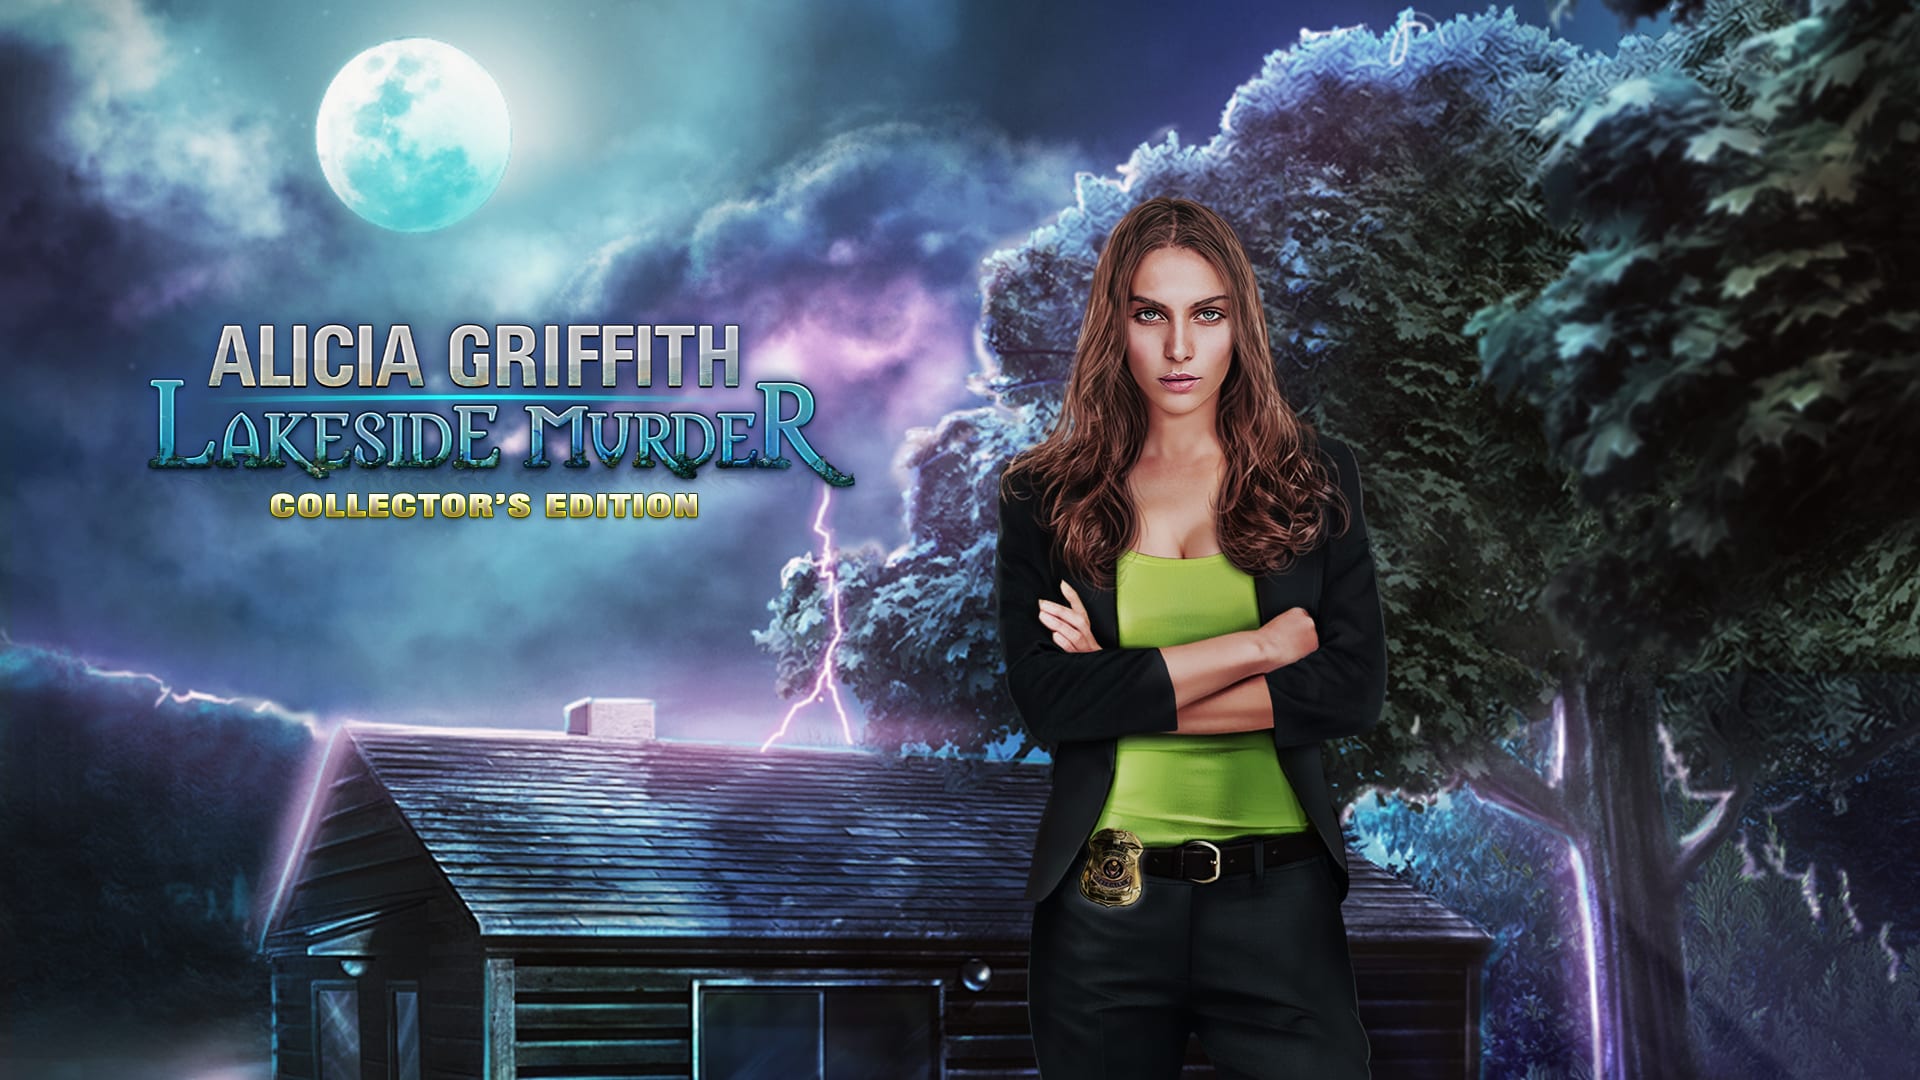 Alicia Griffith: Lakeside Murder Collector's Edition